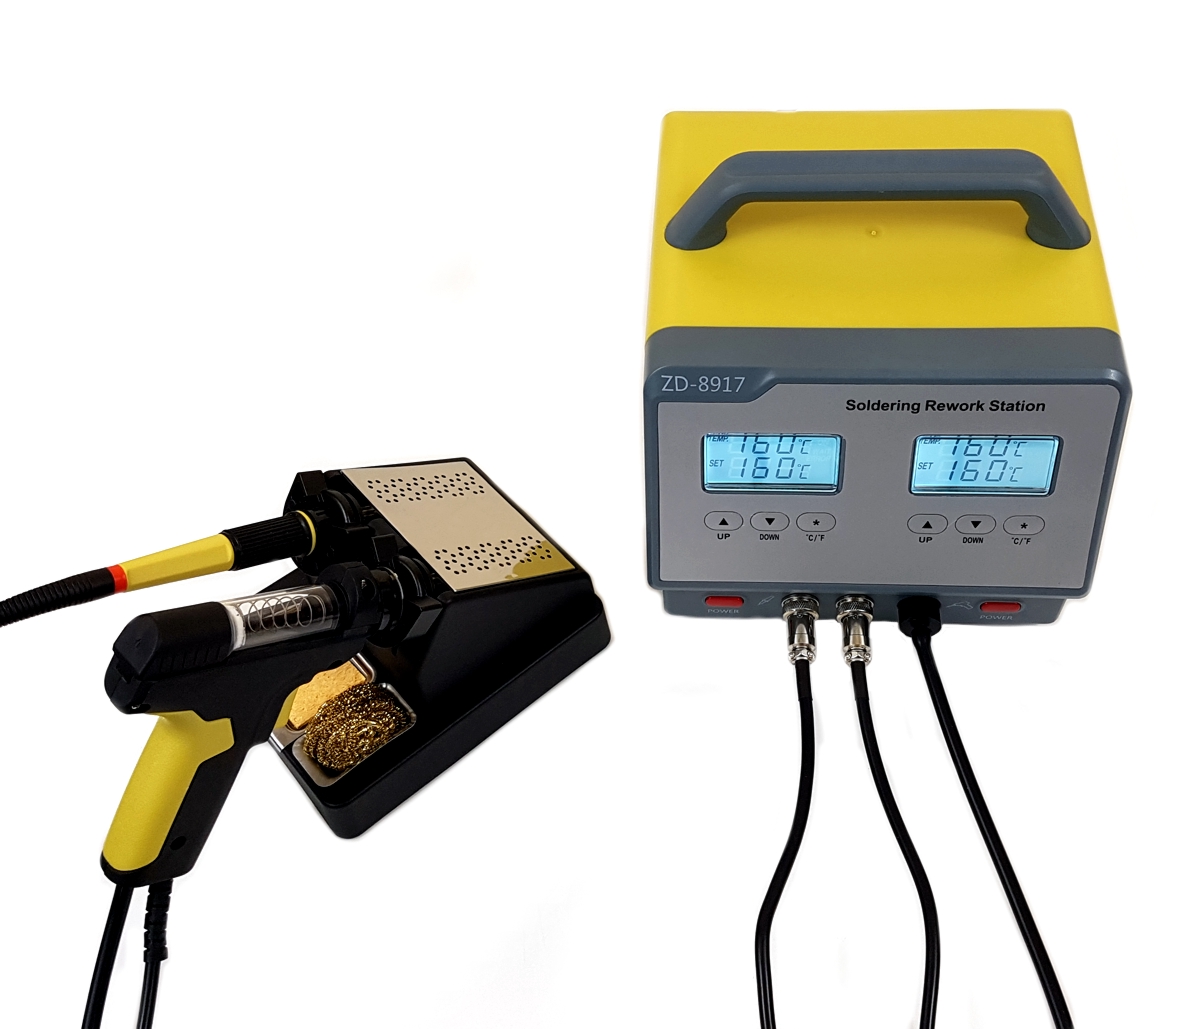 Soldering & Desoldering Station ESD with 2 displays